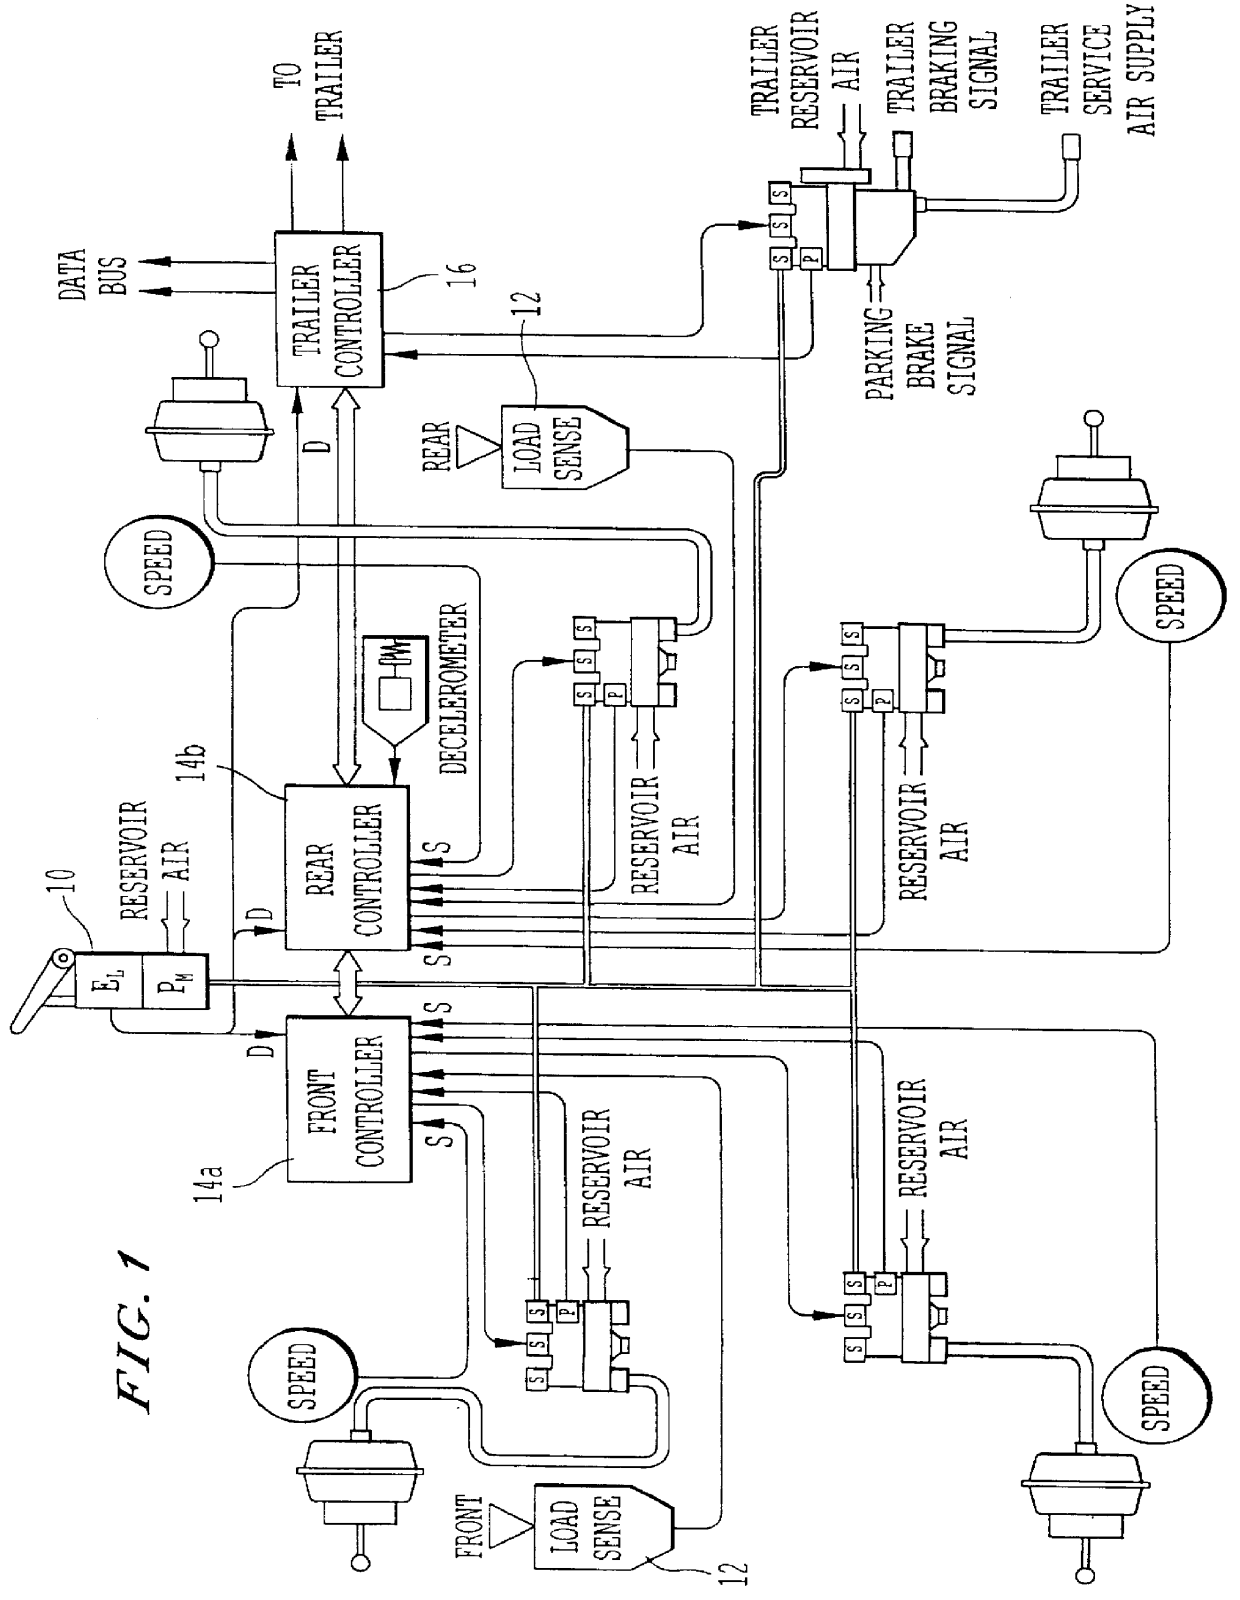 Electronic braking system for road vehicles operating with a trailer